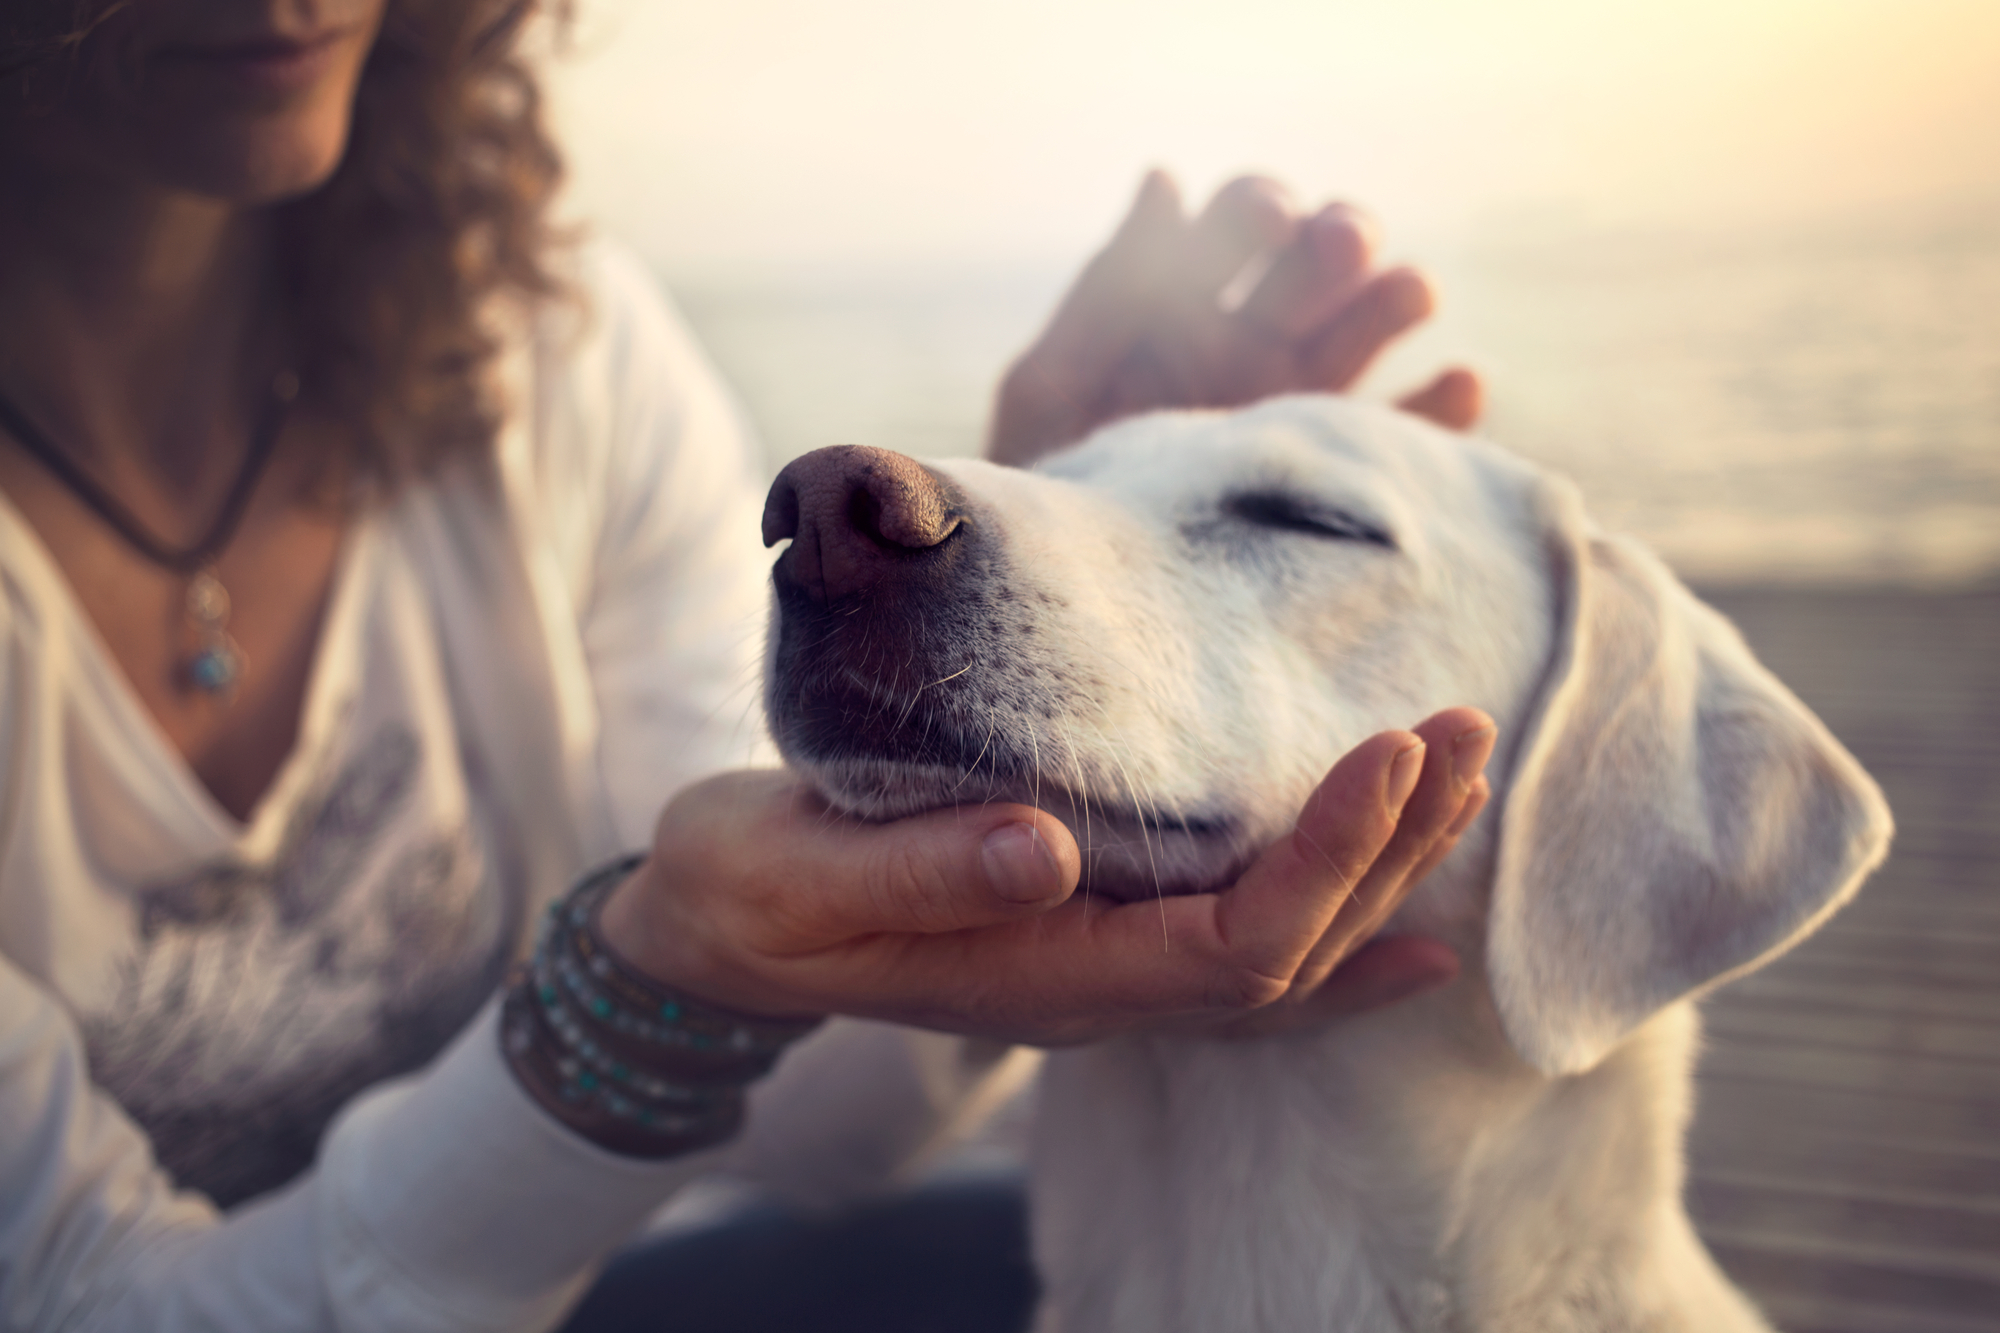 A person with curly hair gently cradles the face of a white dog, who has its eyes closed and appears content. They are outdoors near a body of water. The person is wearing a long-sleeved shirt and bracelets. The scene conveys a sense of calm and affection.